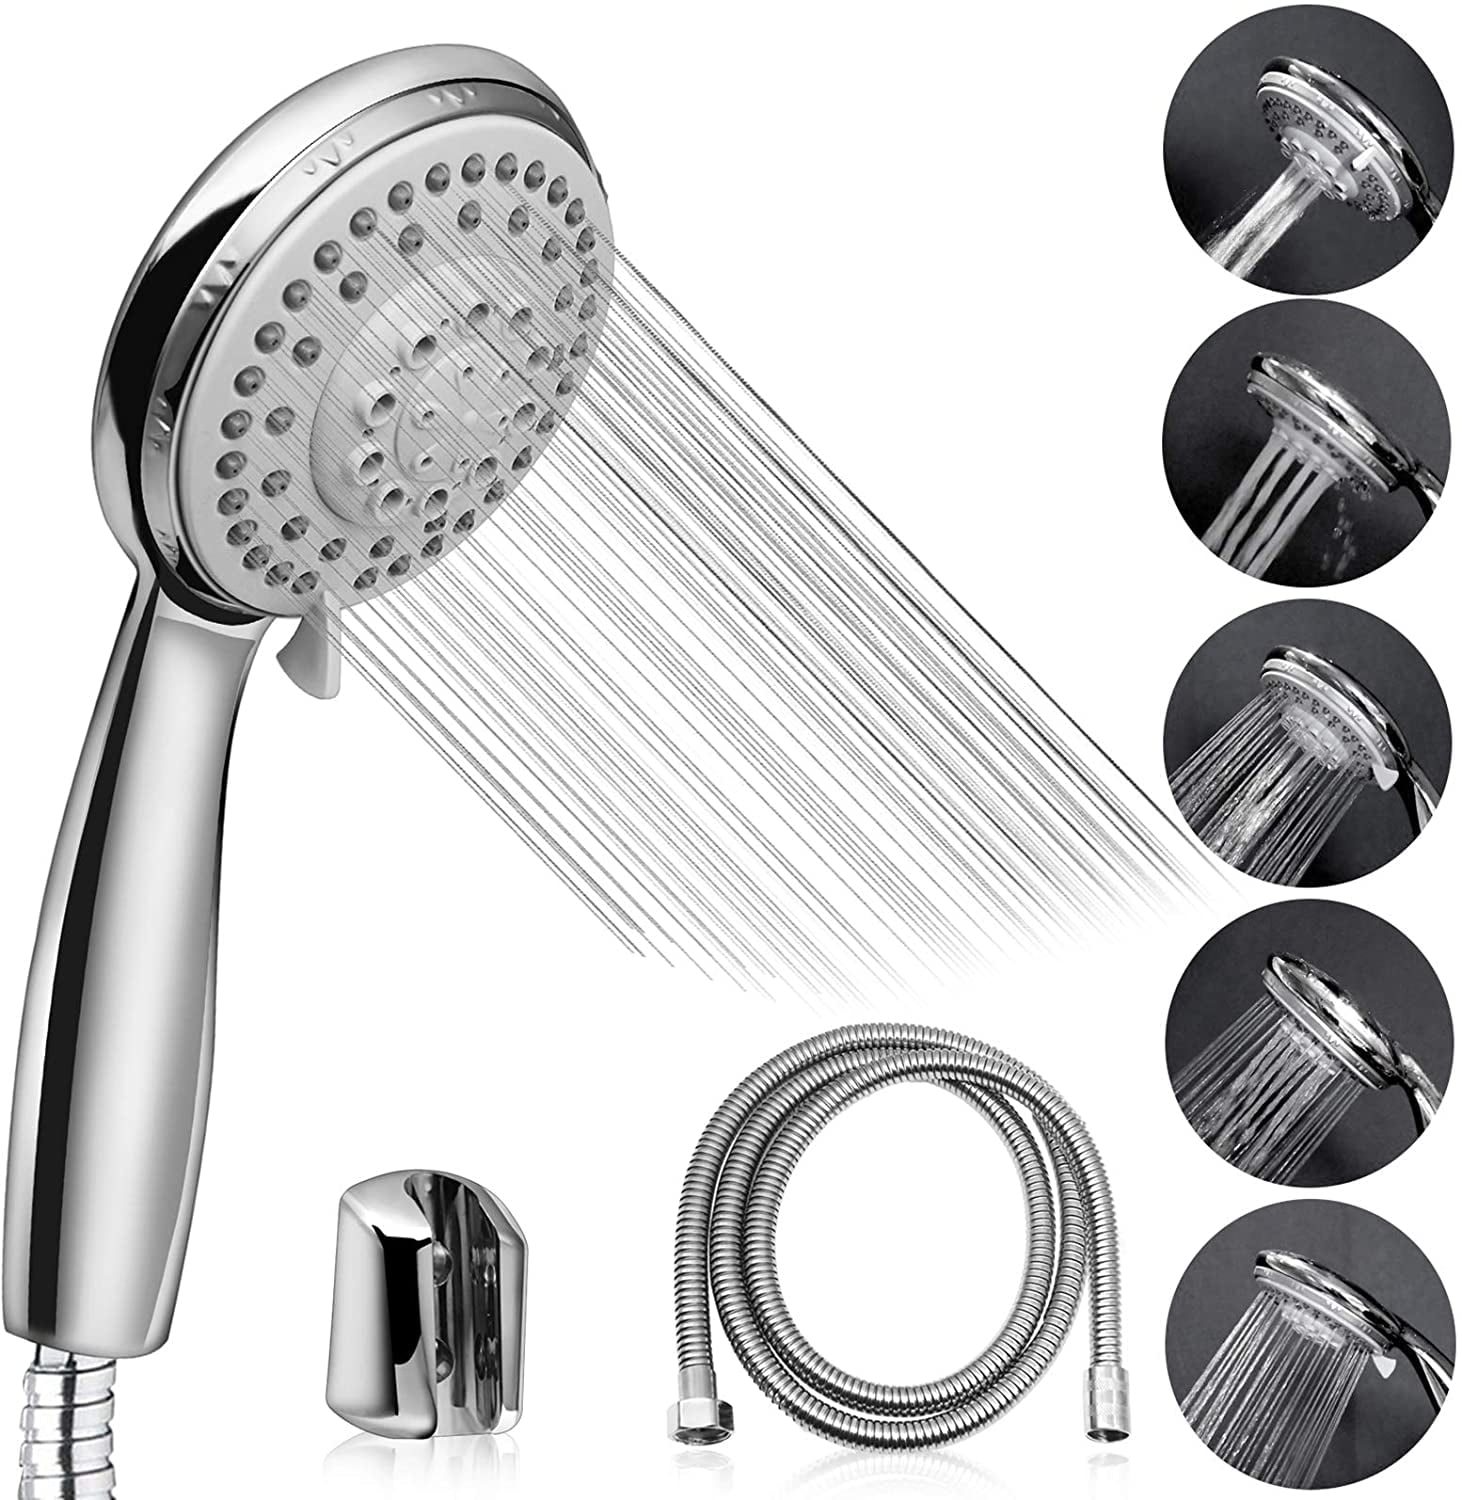 Shower Head Tools High Pressure Air Injection Rainfall Adjustable Accessories 